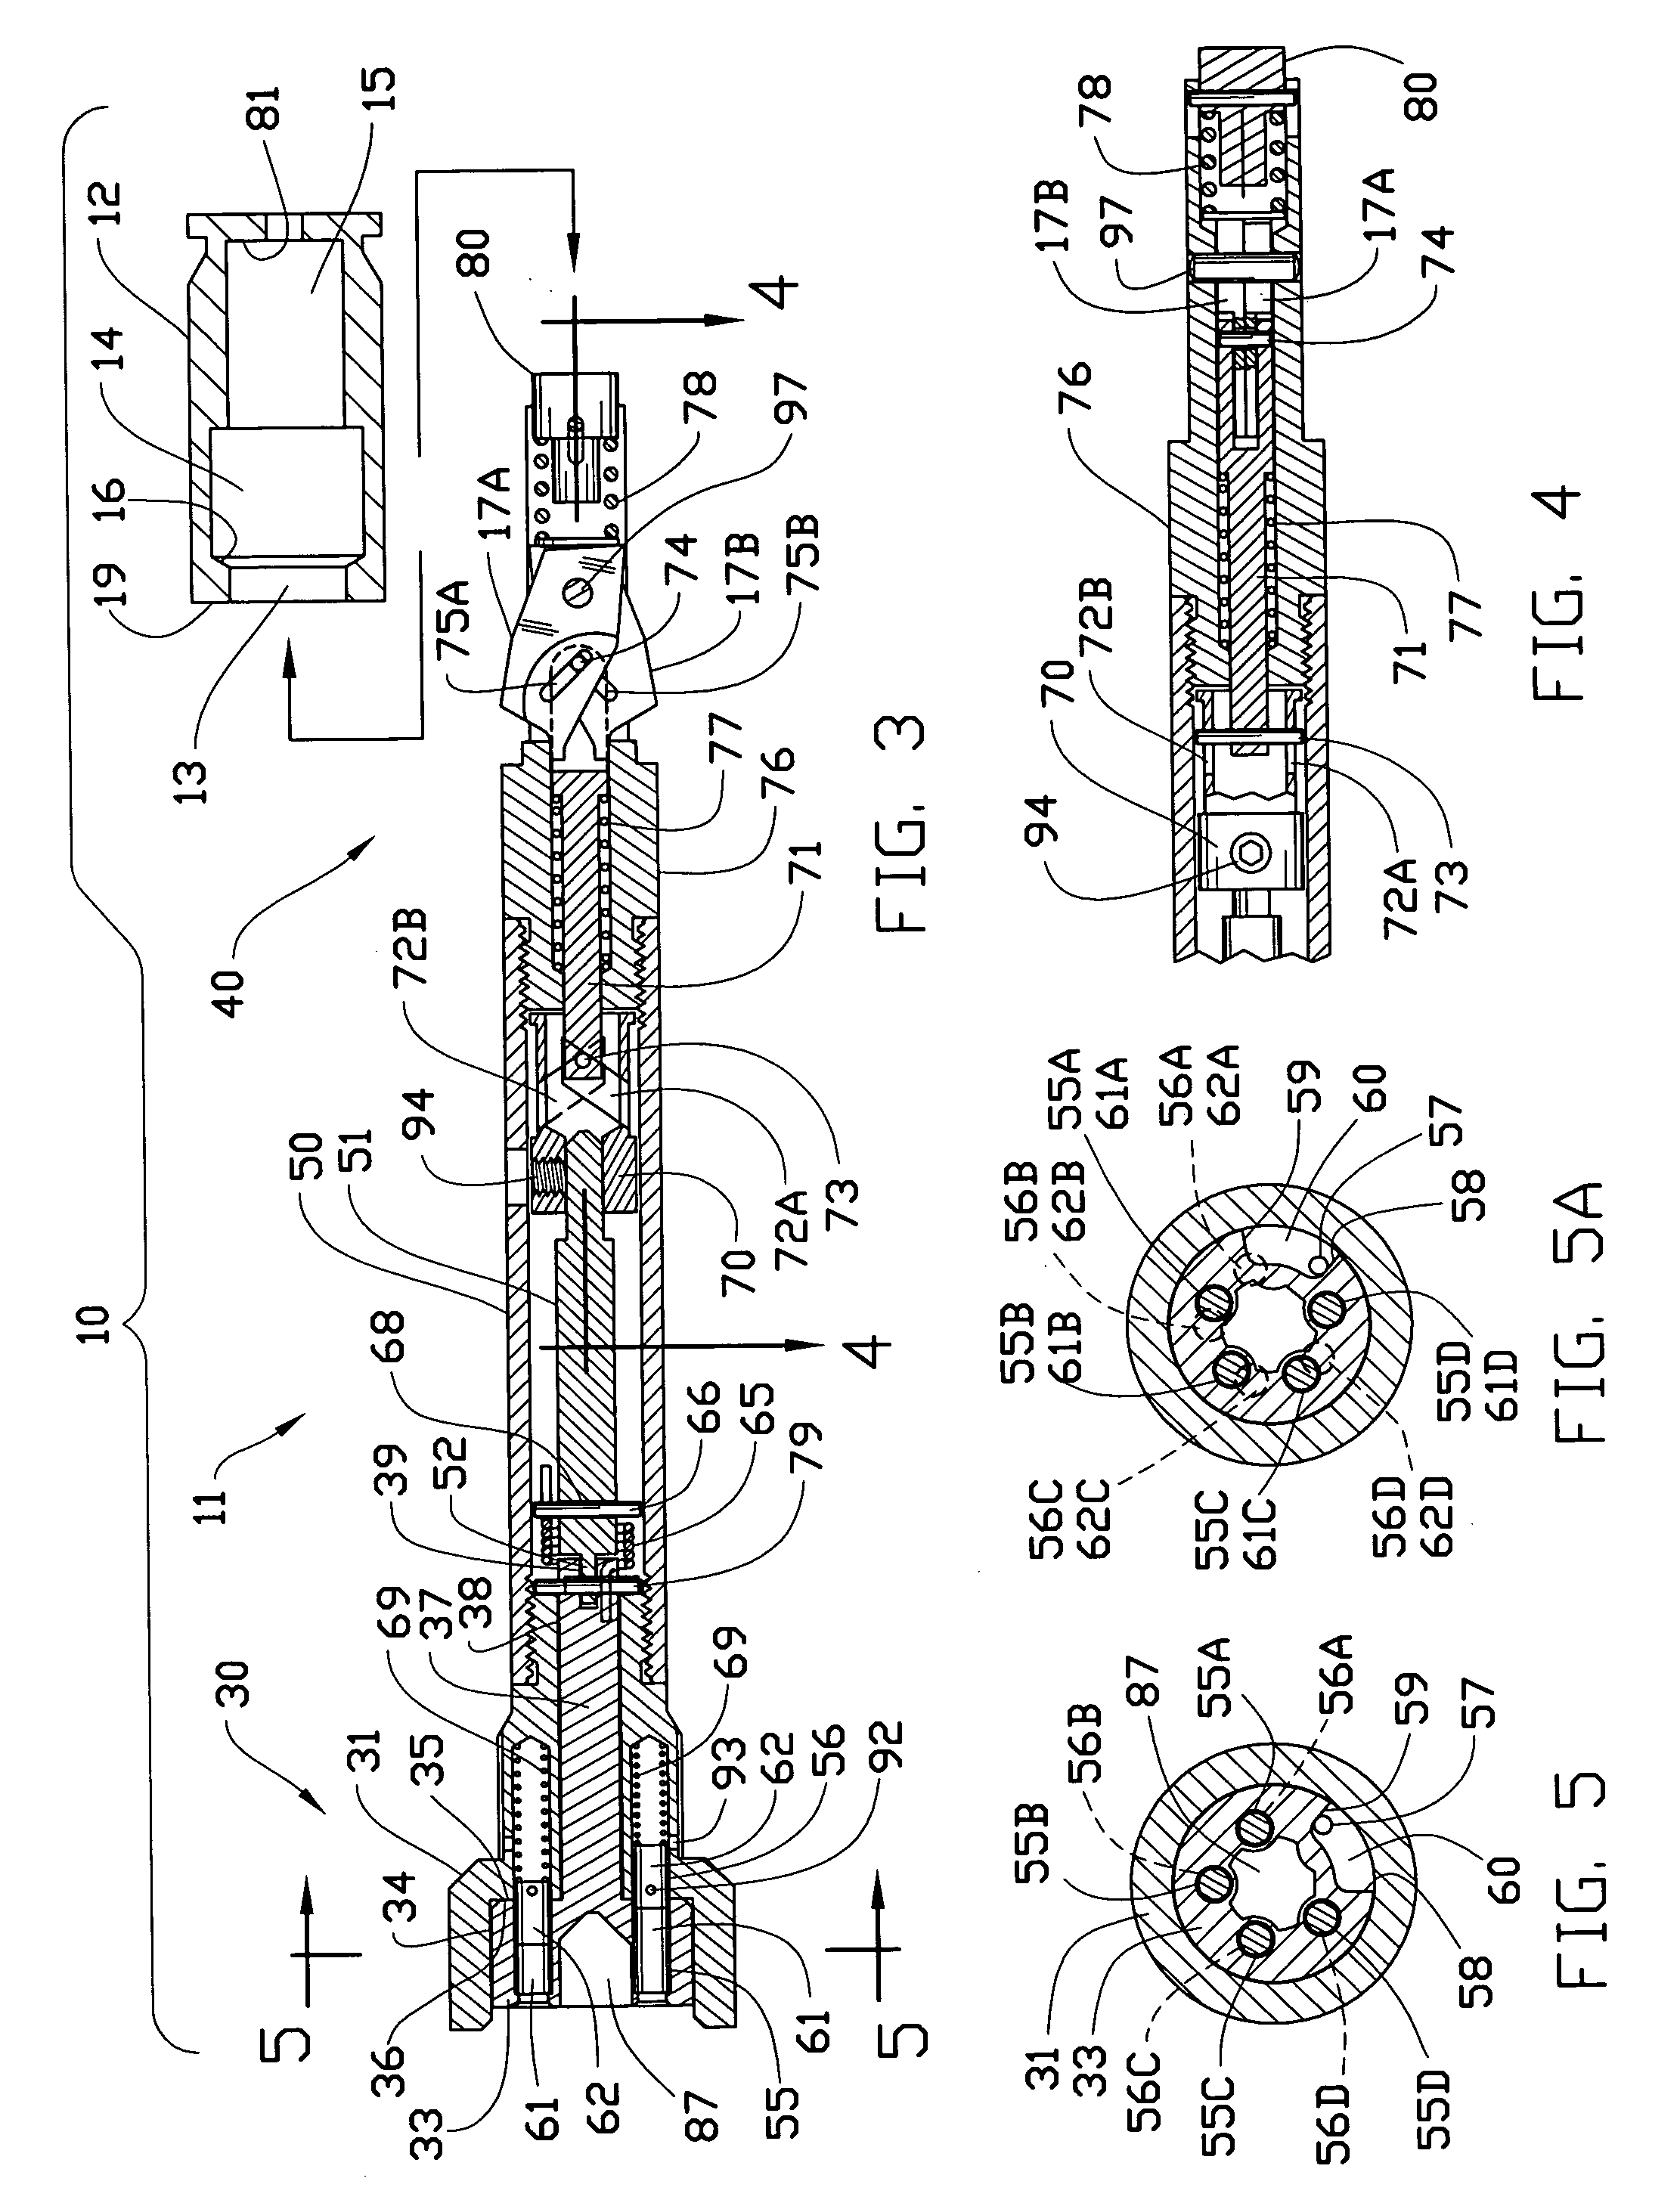 Auto-eject gun-lock device with ring-mounted key